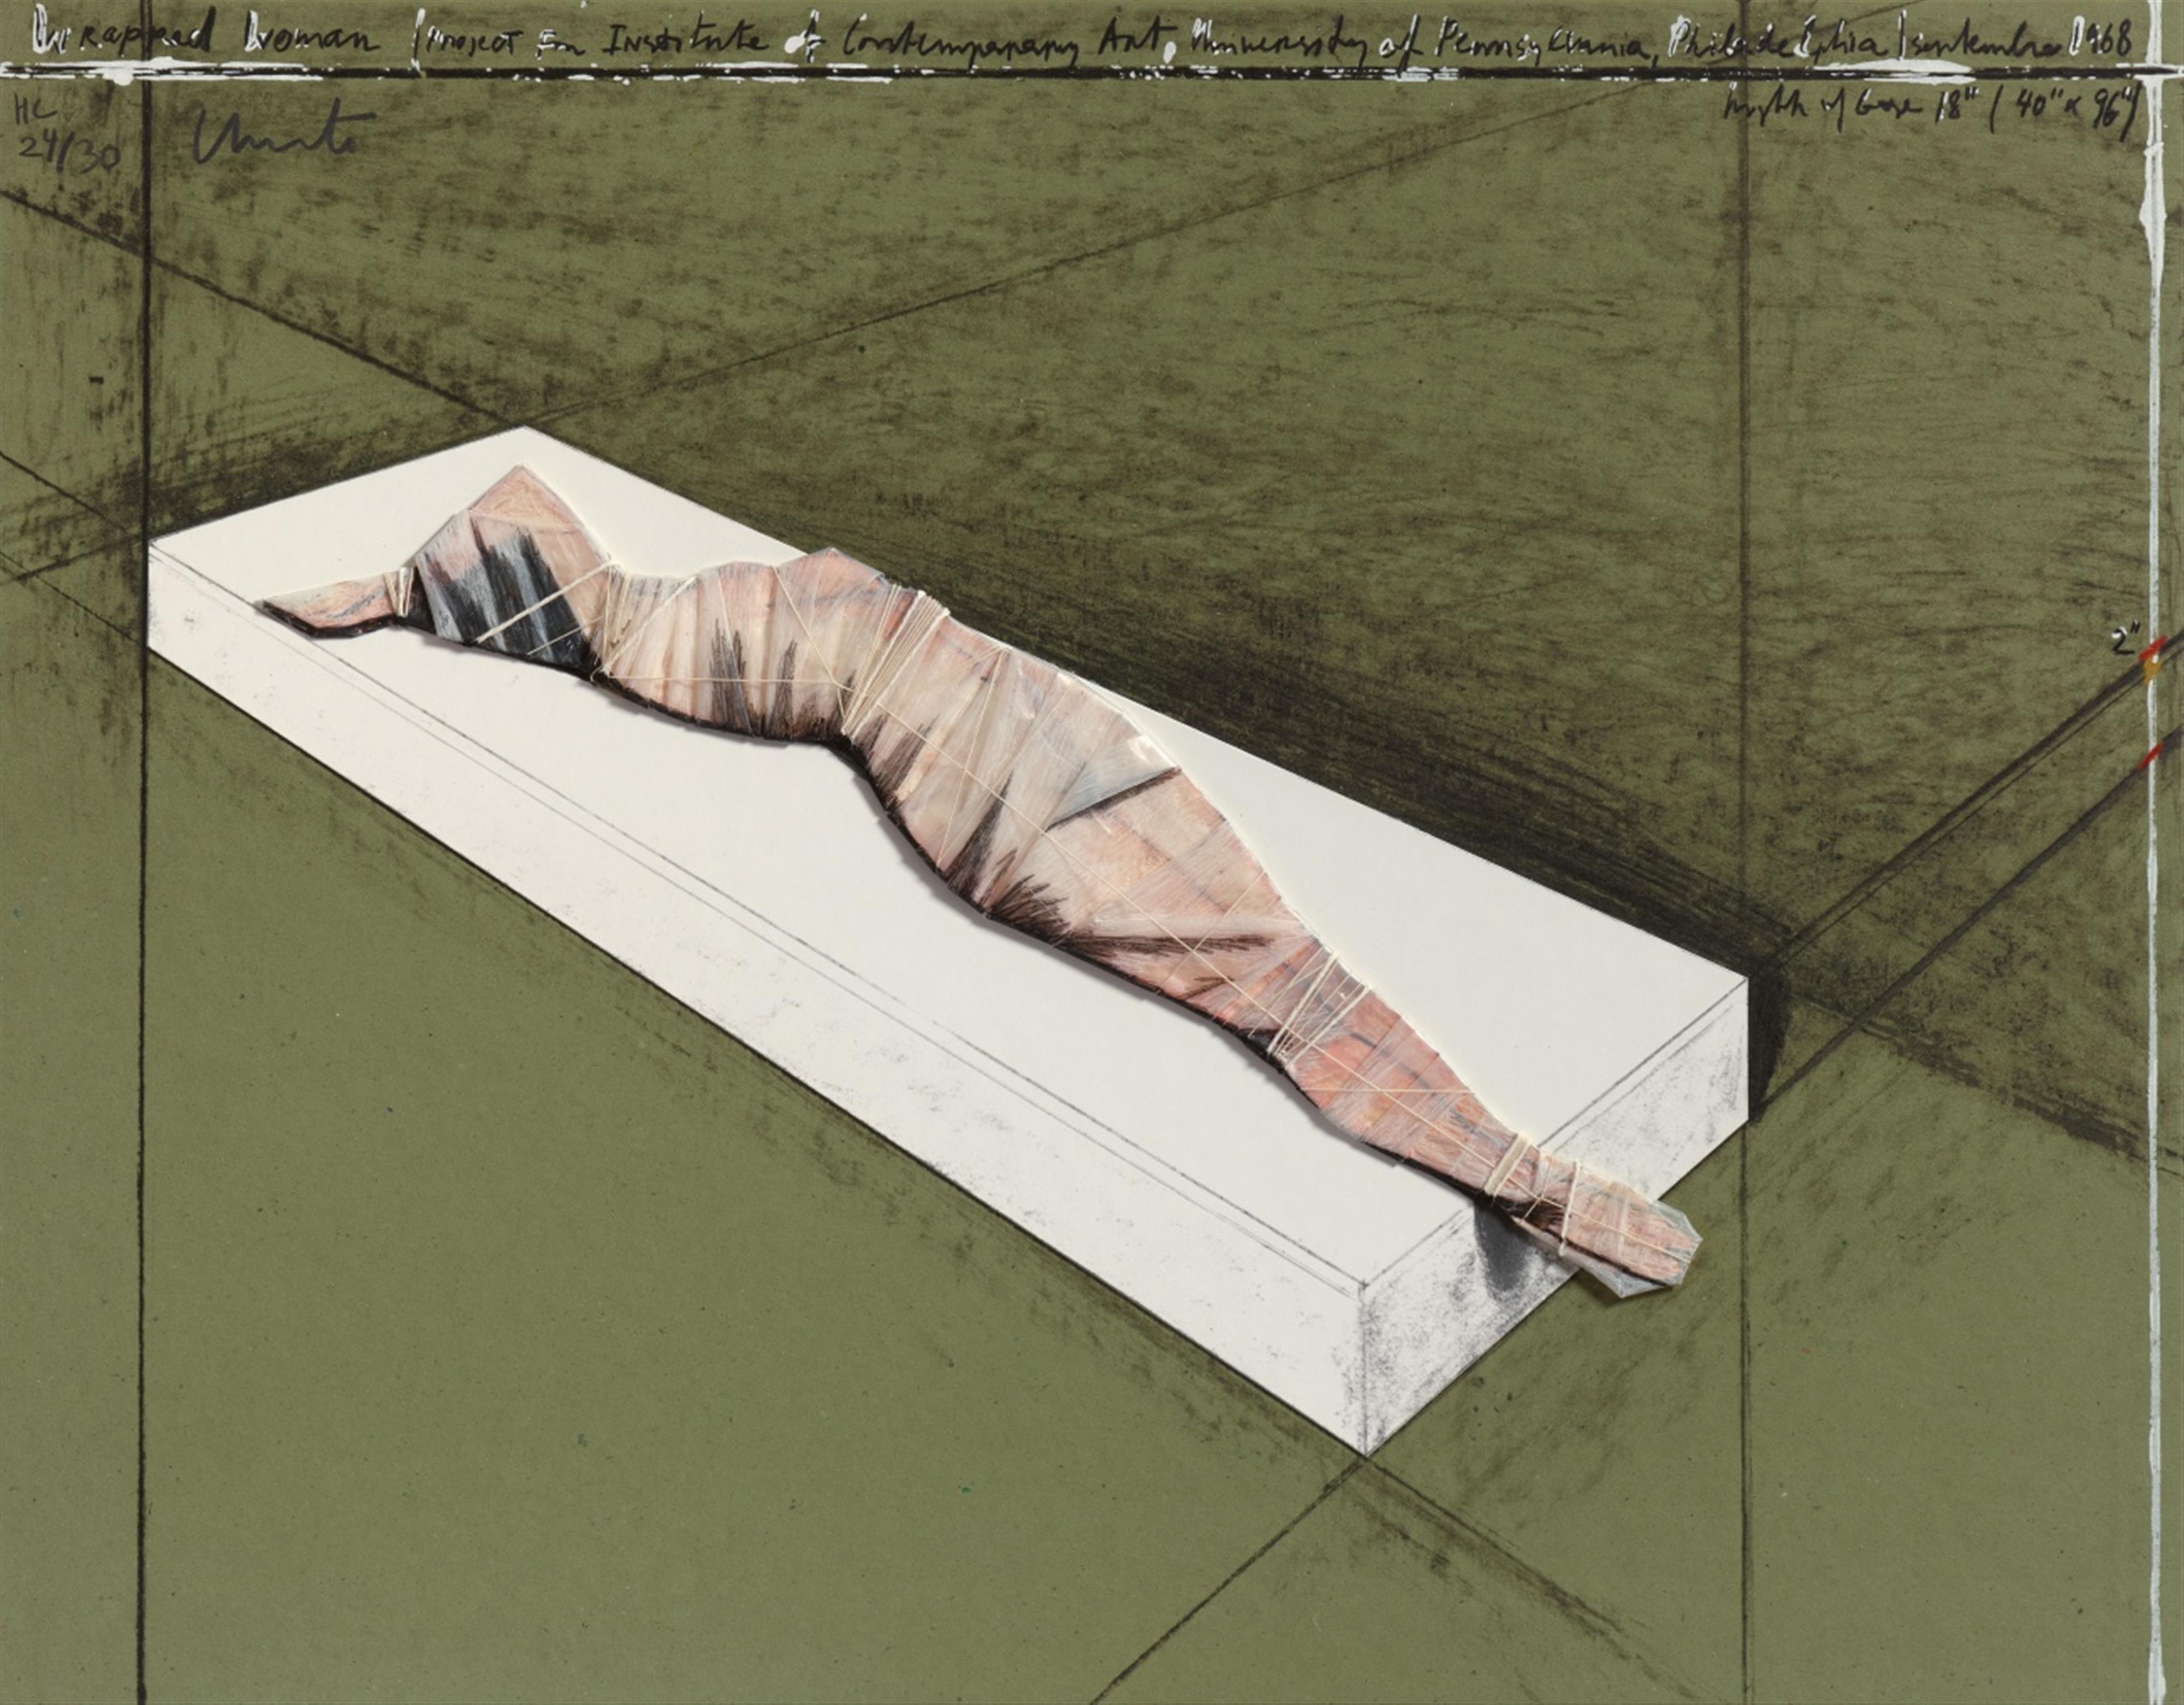 Christo - Wrapped Woman, Project for the Institute of Contemporary Art, Philadelphia, 1968 - image-1